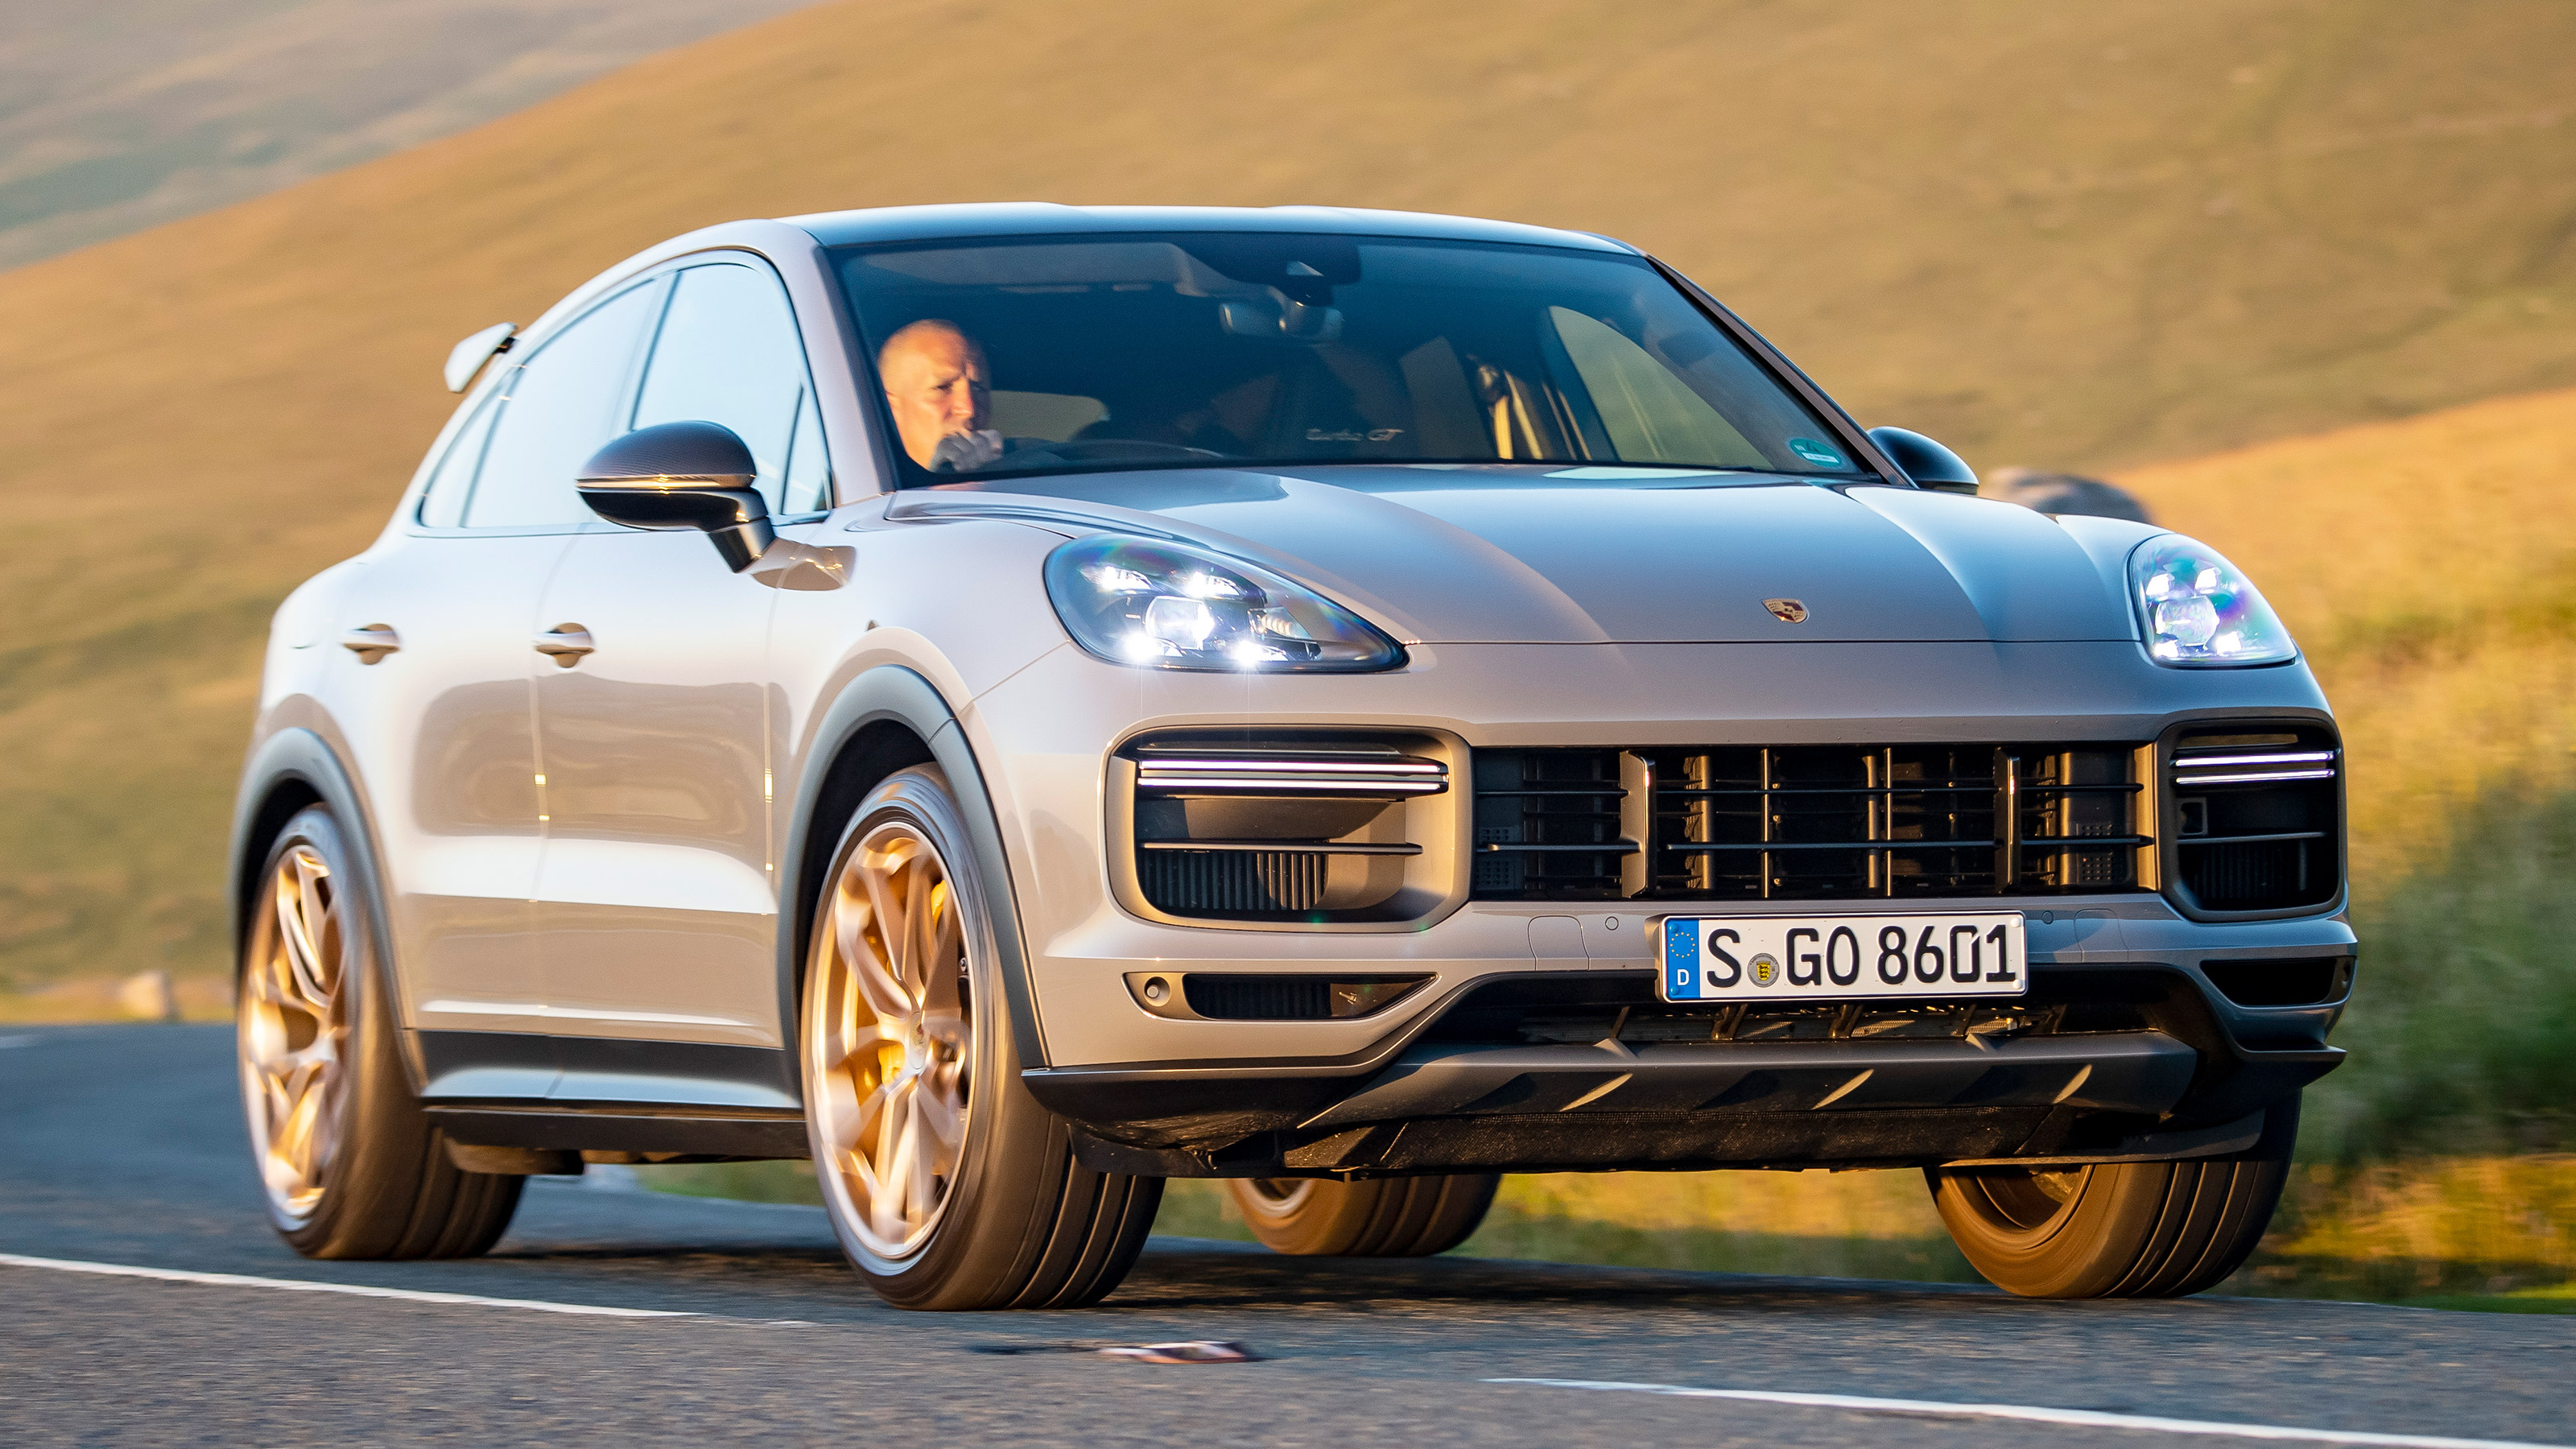 Porsche Cayenne 0-60 - 2024 Model Overview and 0-60 Time by Trims